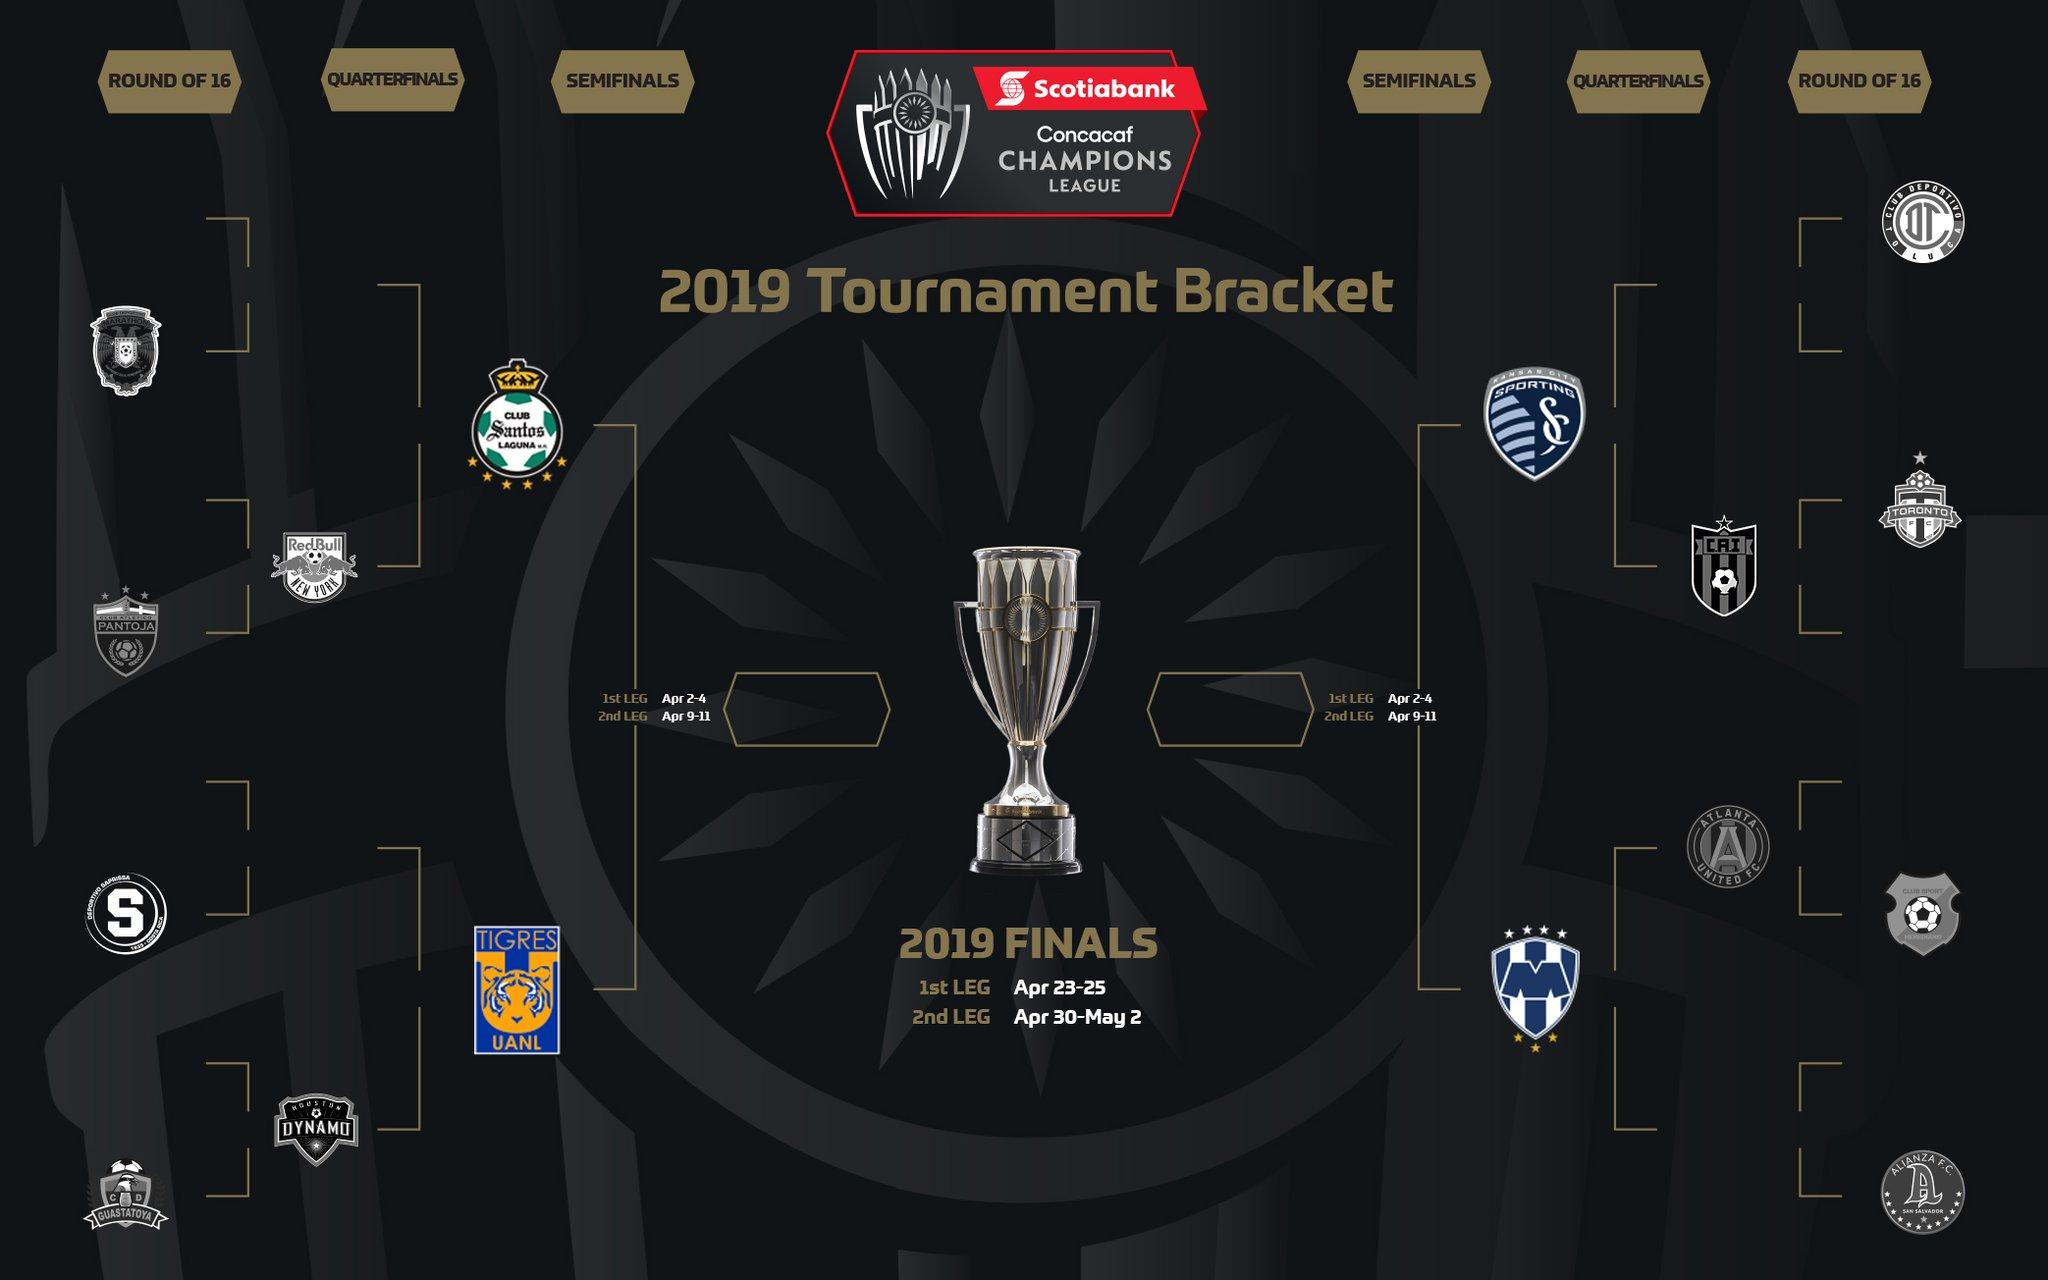 Down to the Semis: Concacaf Champions League Bracket